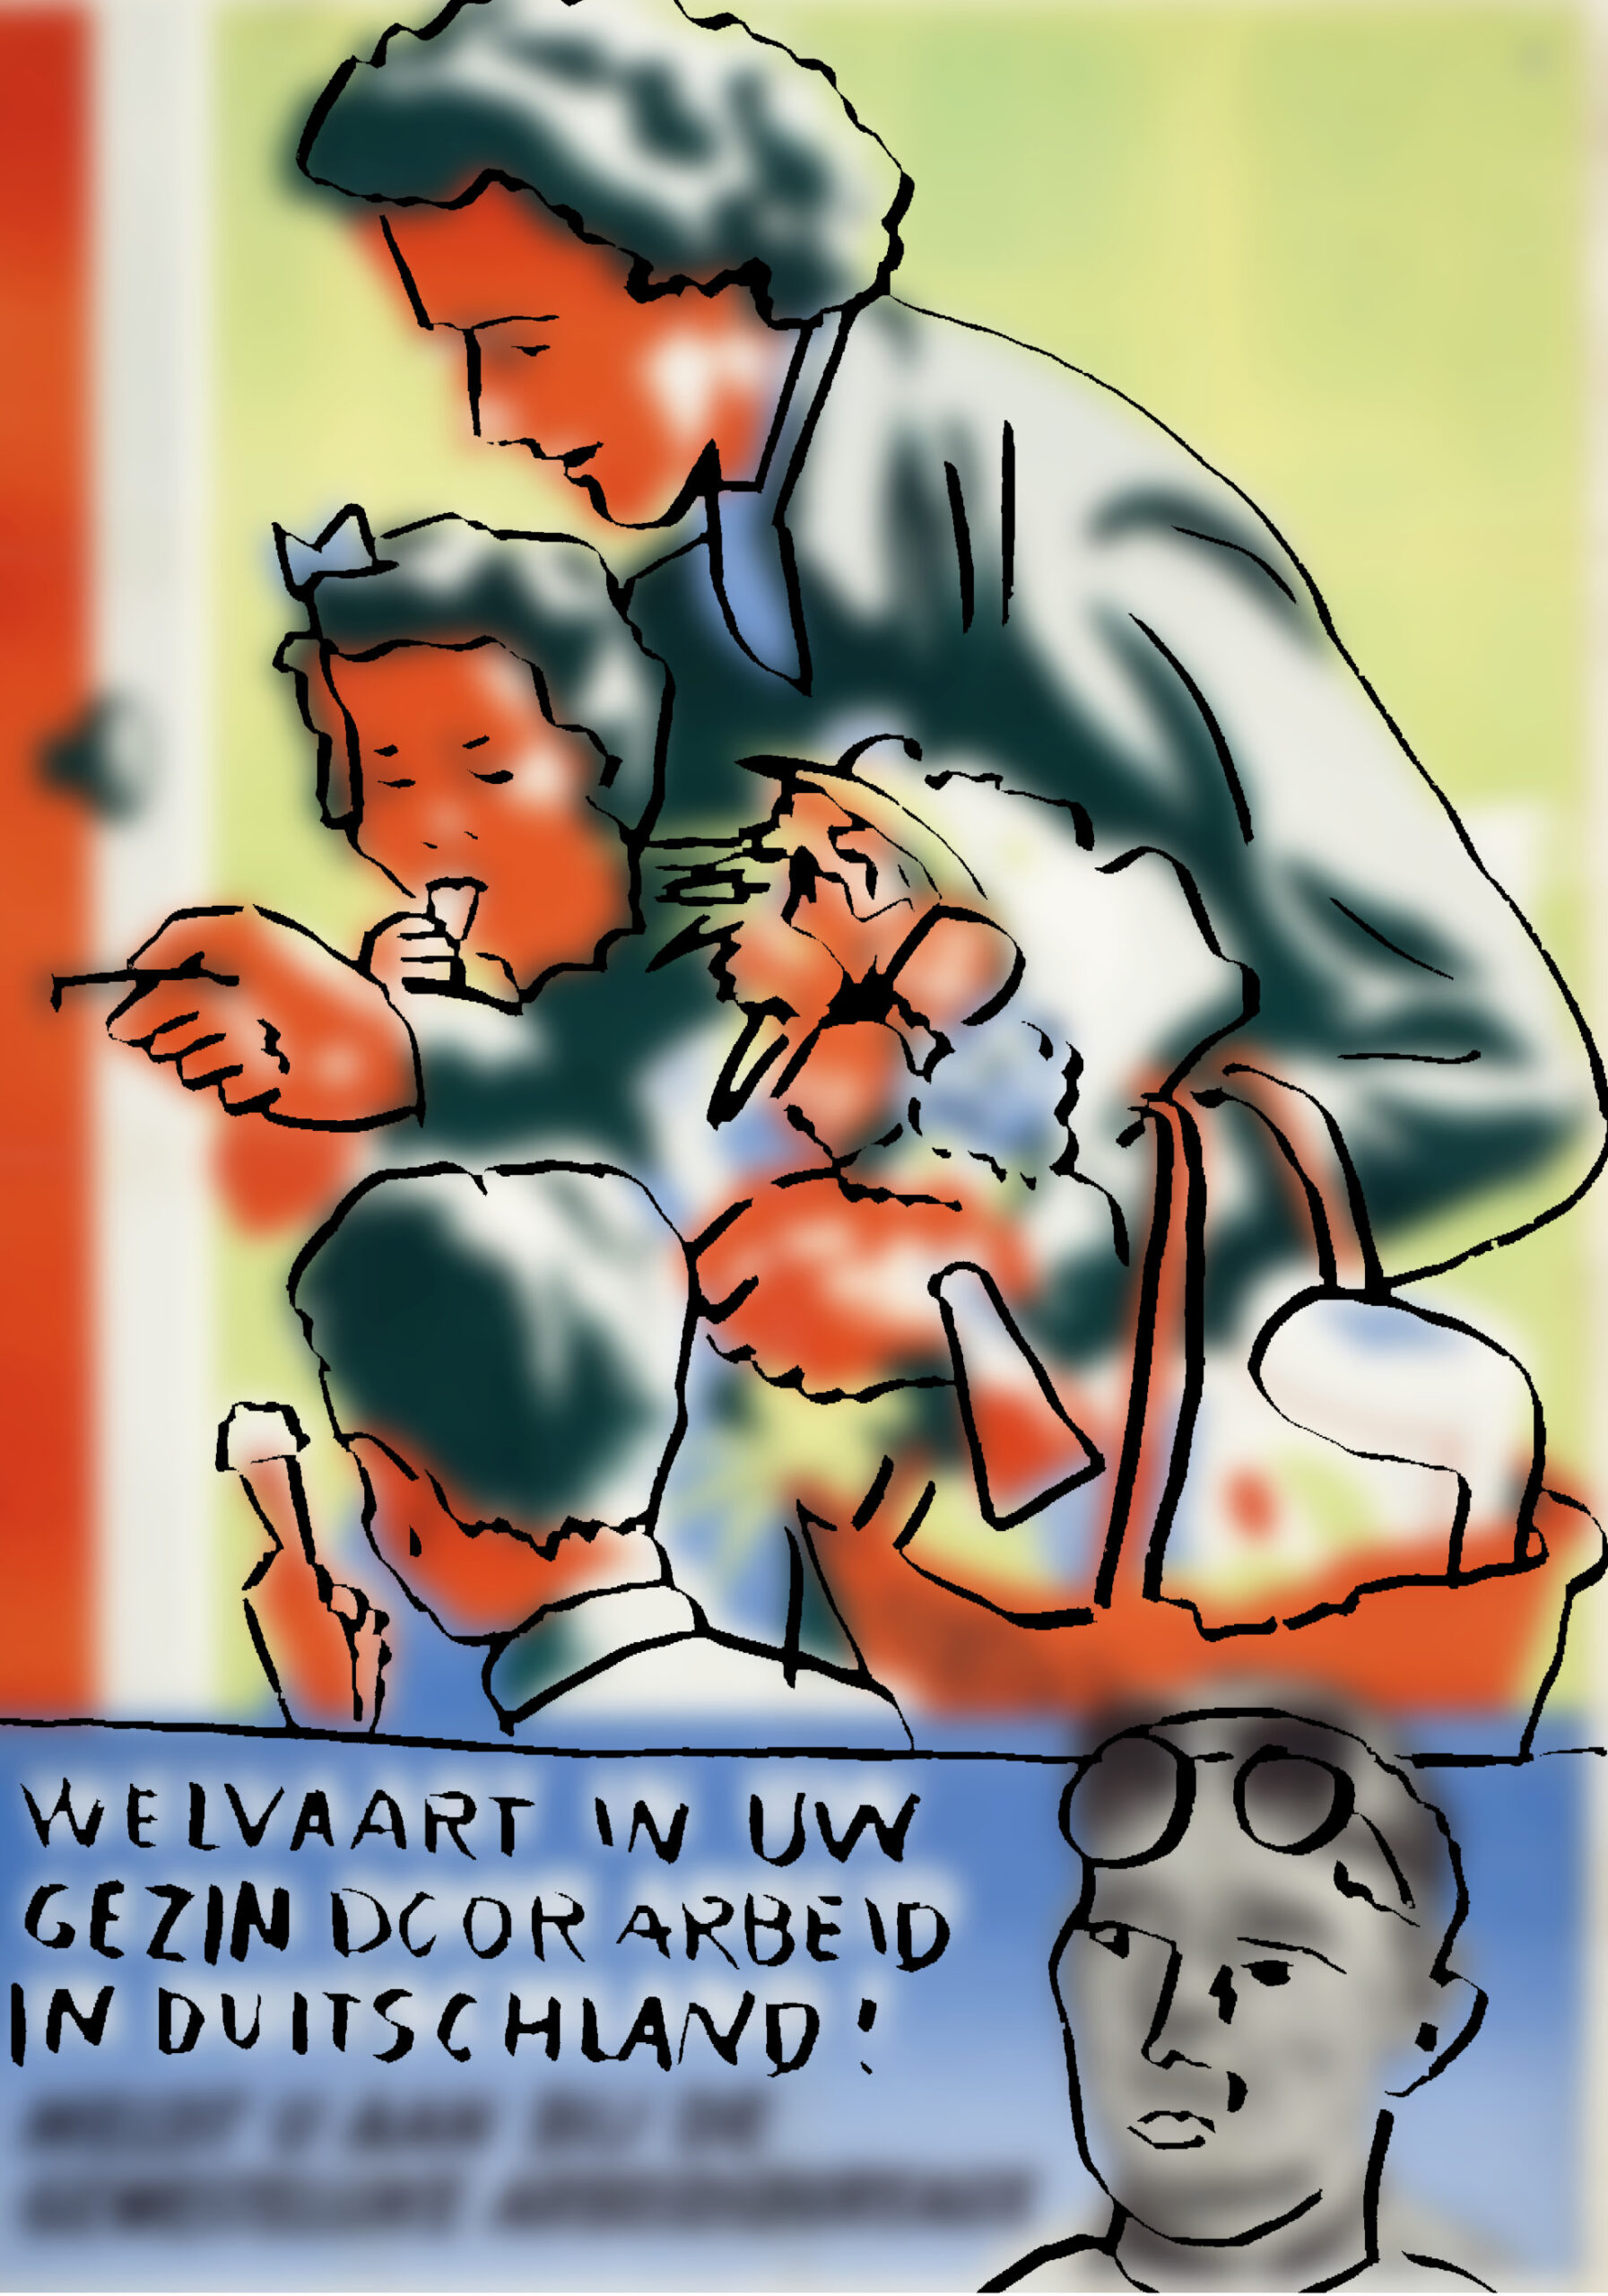 “Prosperity in your family through work in Germany! Sign up at the regional employment offices.” NIOD, beeldbankwo2, no. 193513